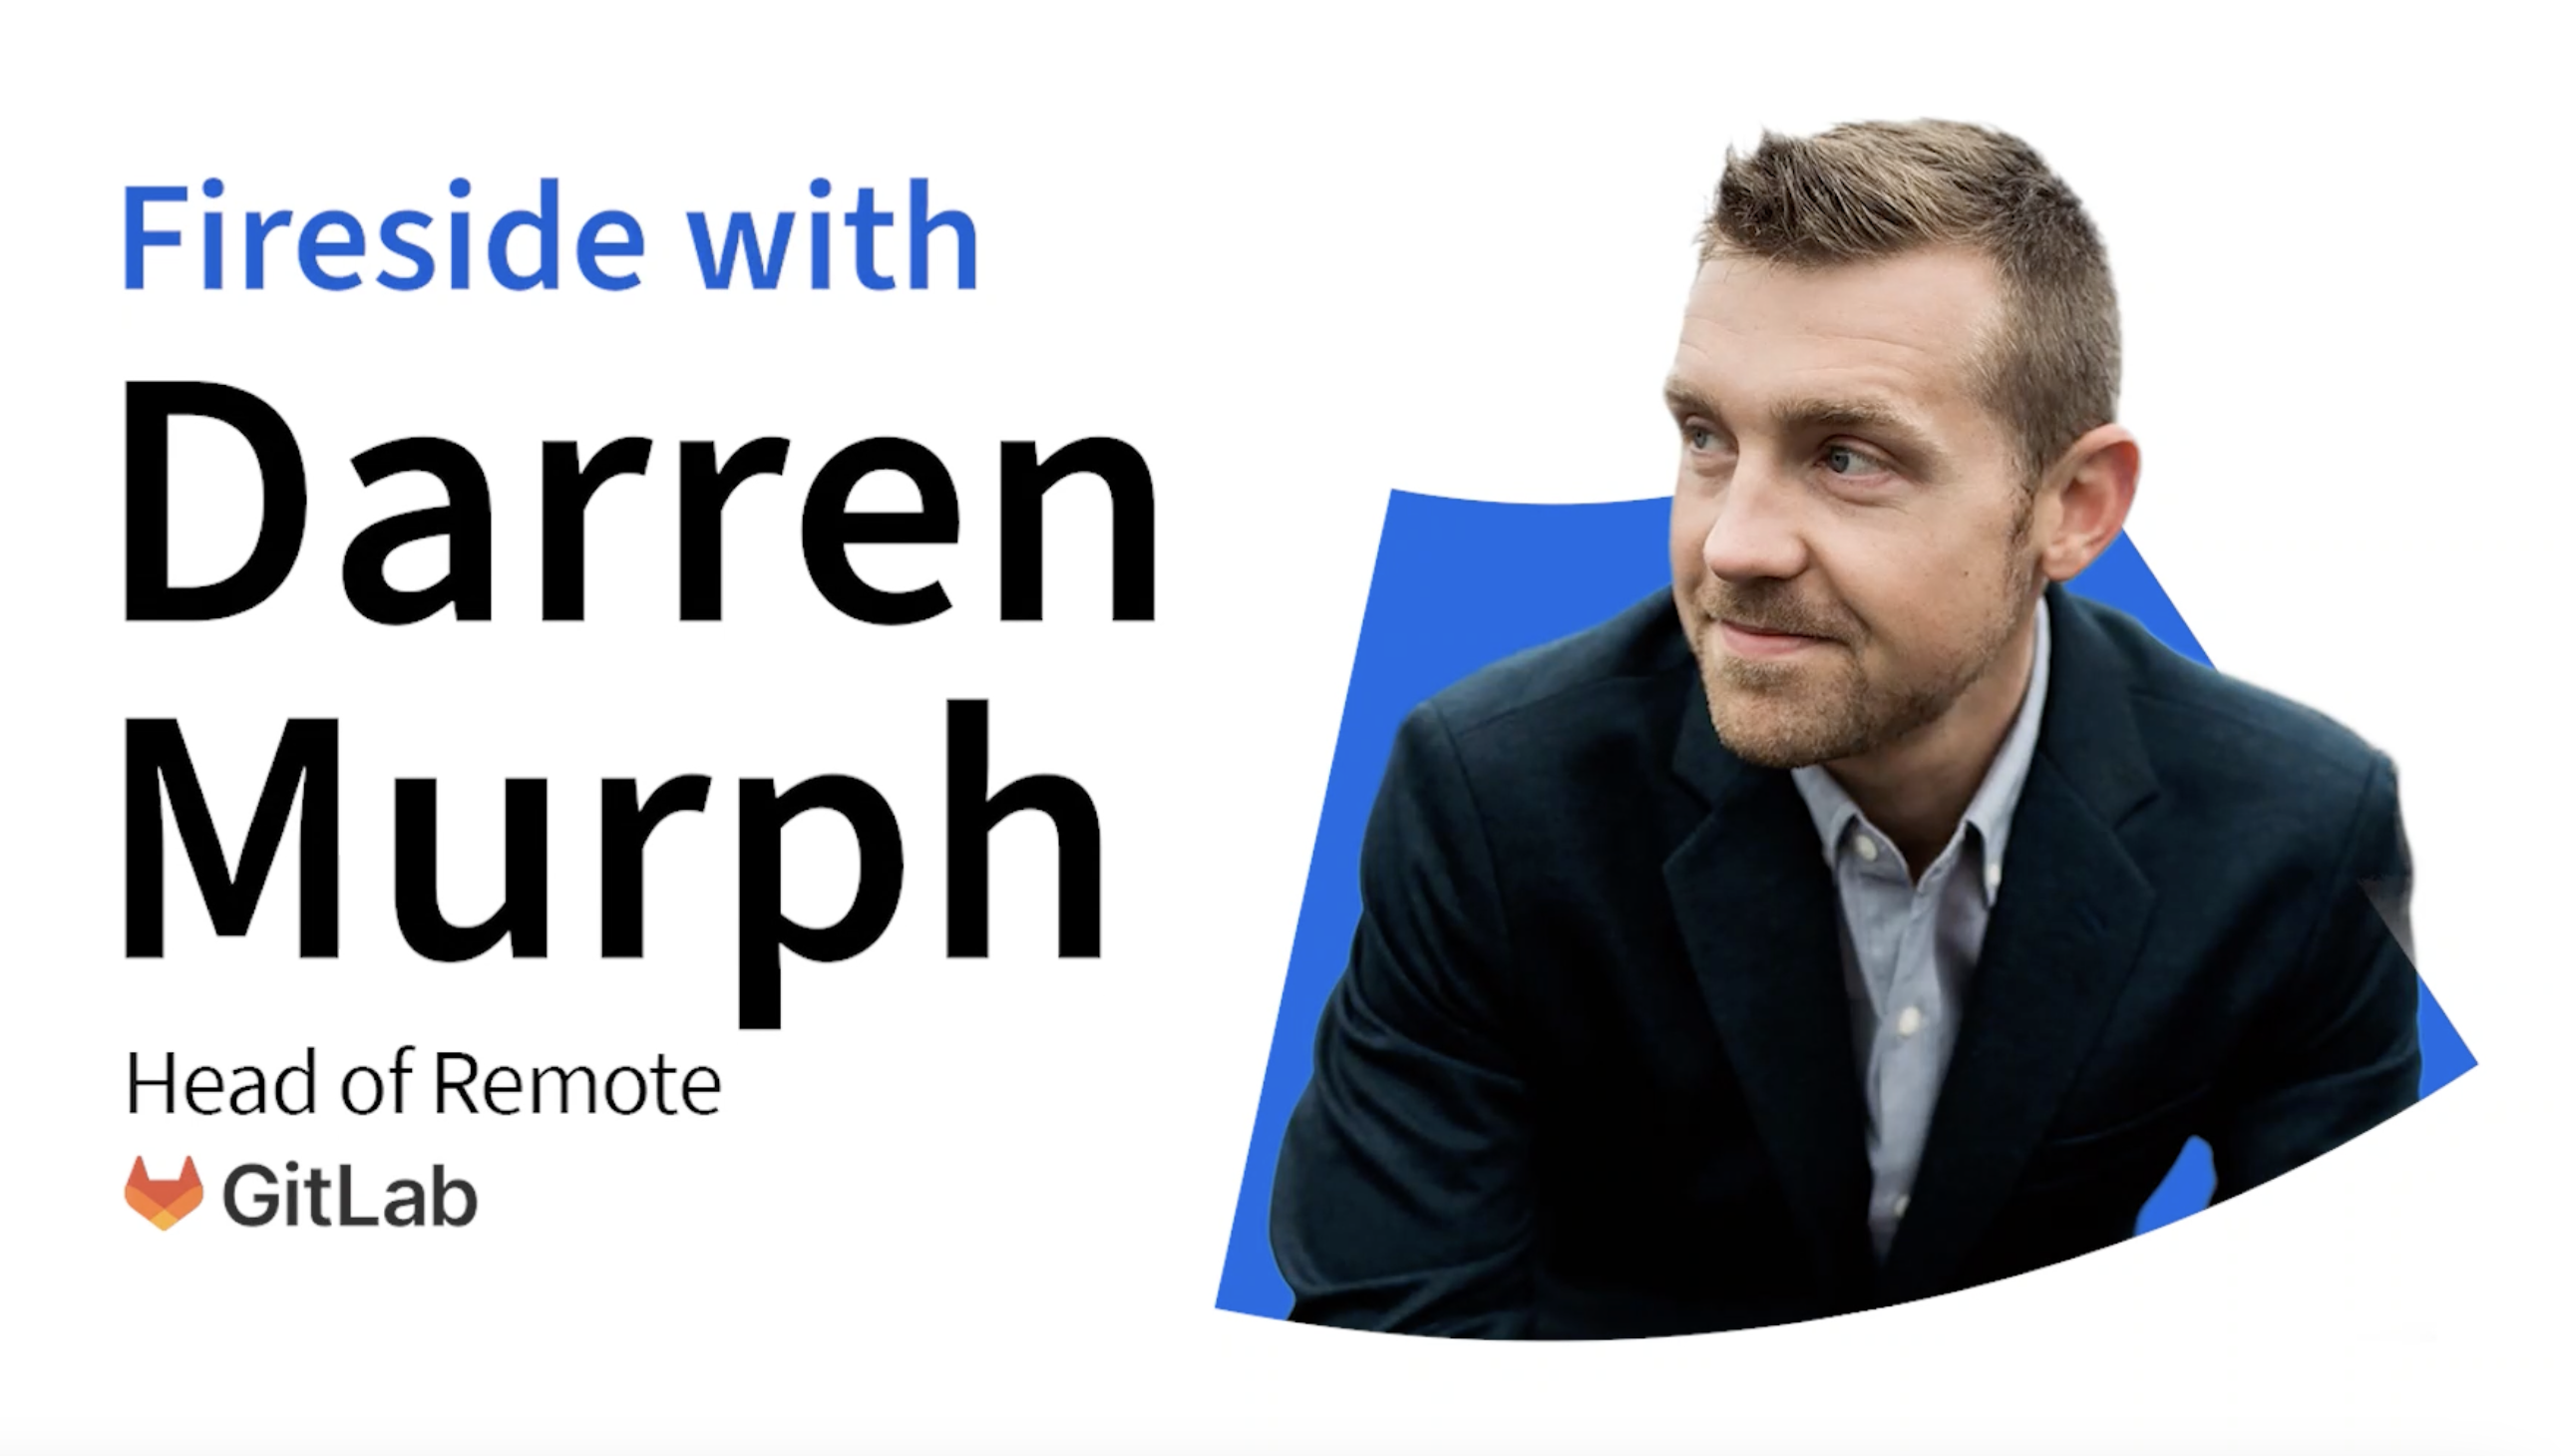 Remote Leadership: Q&A with Darren Murph, Head of Remote at GitLab